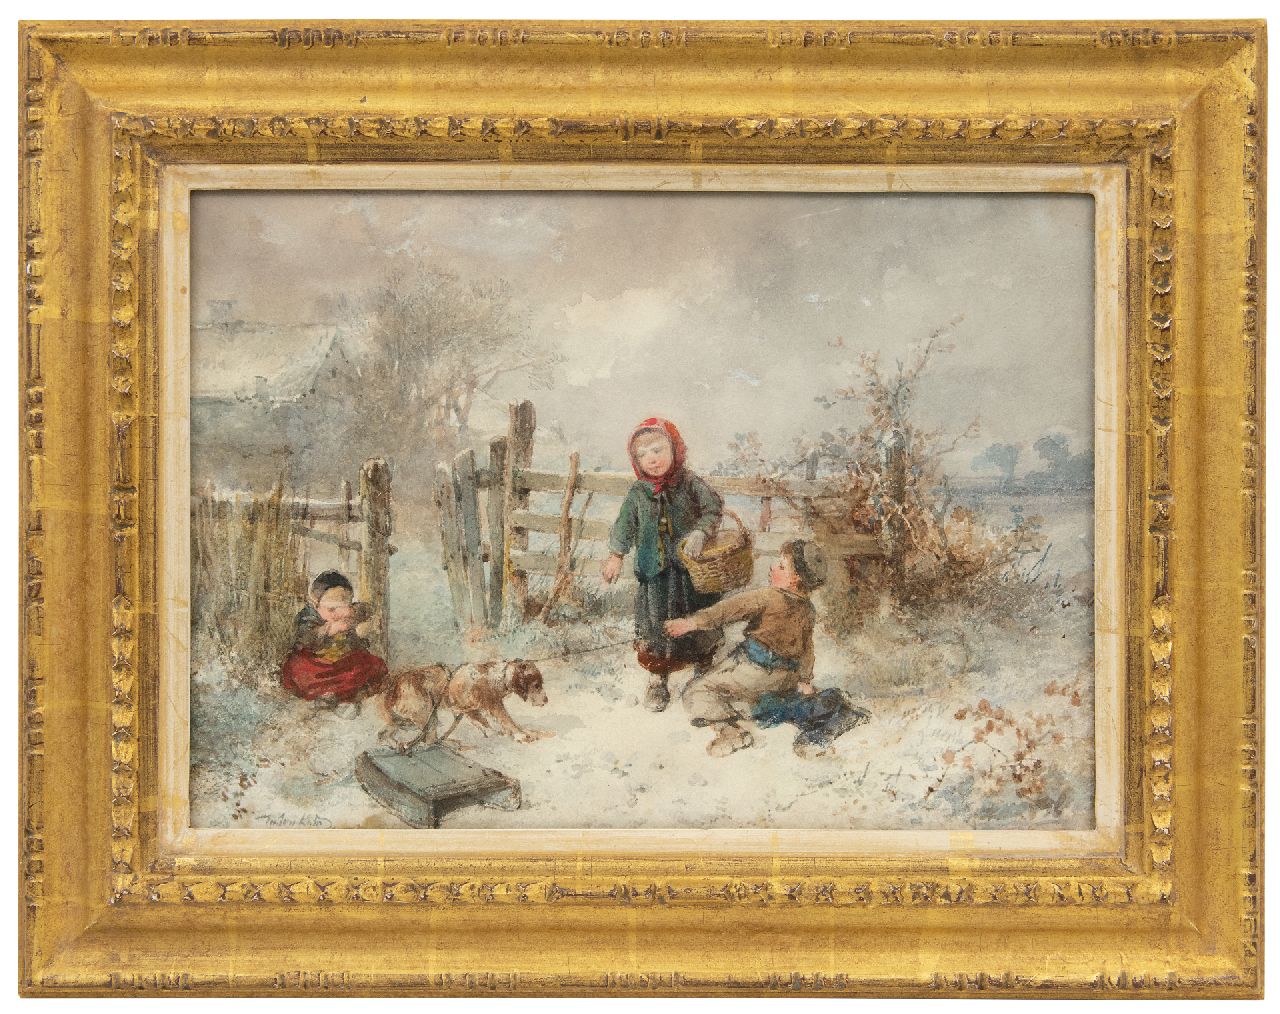 Kate J.M.H. ten | Johan 'Mari' Henri ten Kate | Watercolours and drawings offered for sale | Children playing in the snow, watercolour on paper 25.7 x 35.9 cm, signed l.l.